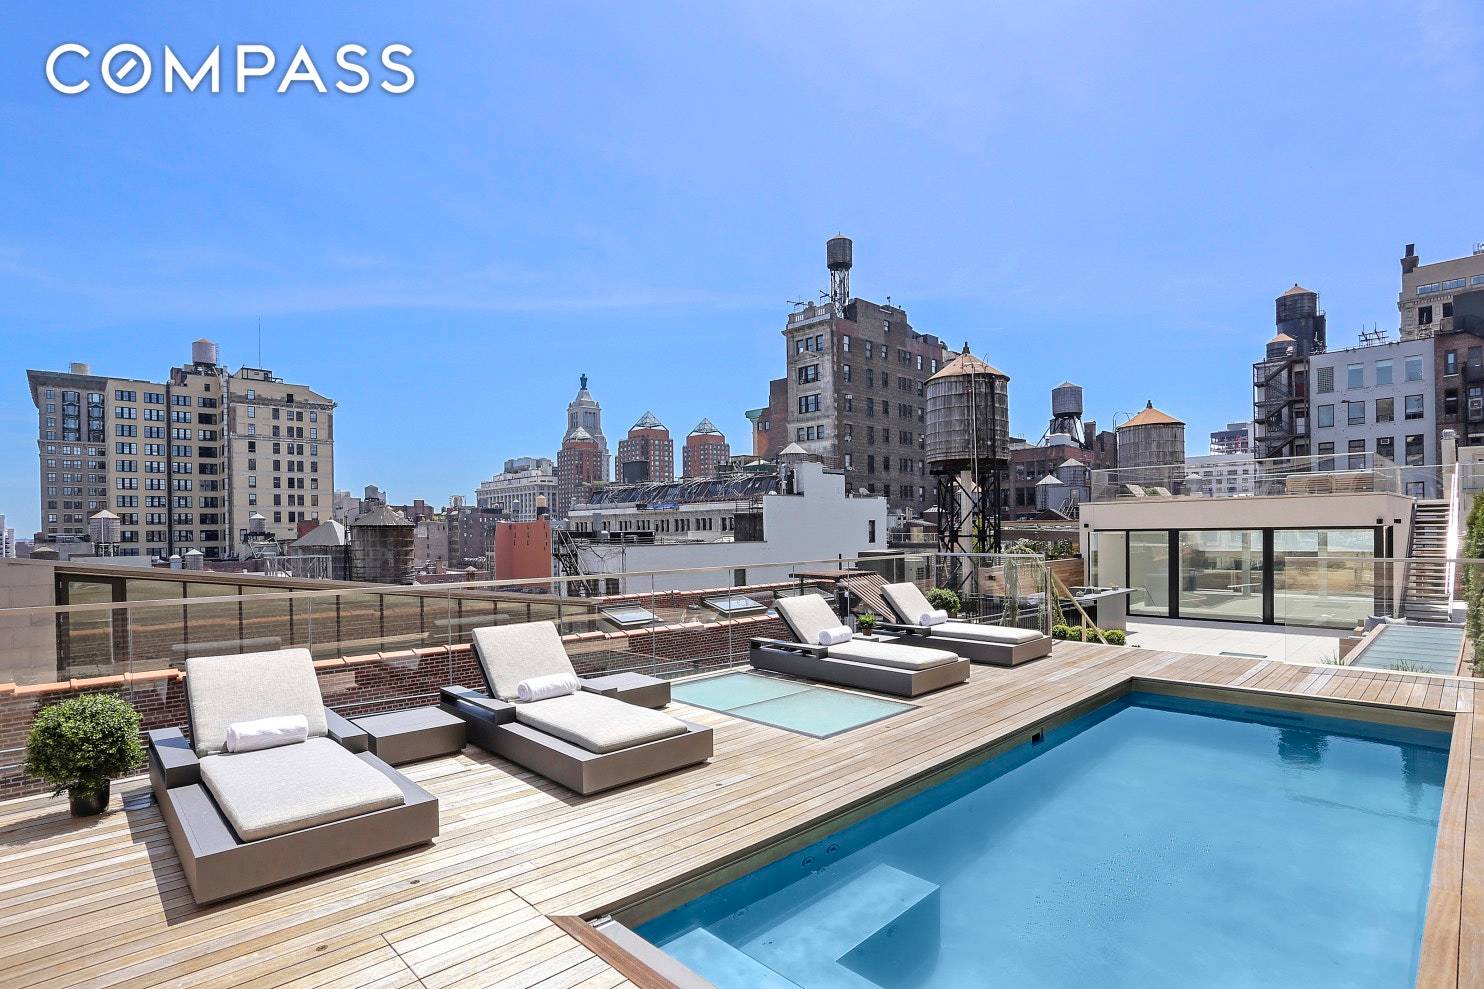 NEW 6000 SF PENTHOUSE w POOL 4000 SF PRIVATE ROOF TERRACE Here is the freshly created, designer dream PENTHOUSE LOFT that sets a new standard in downtown living a shining ...